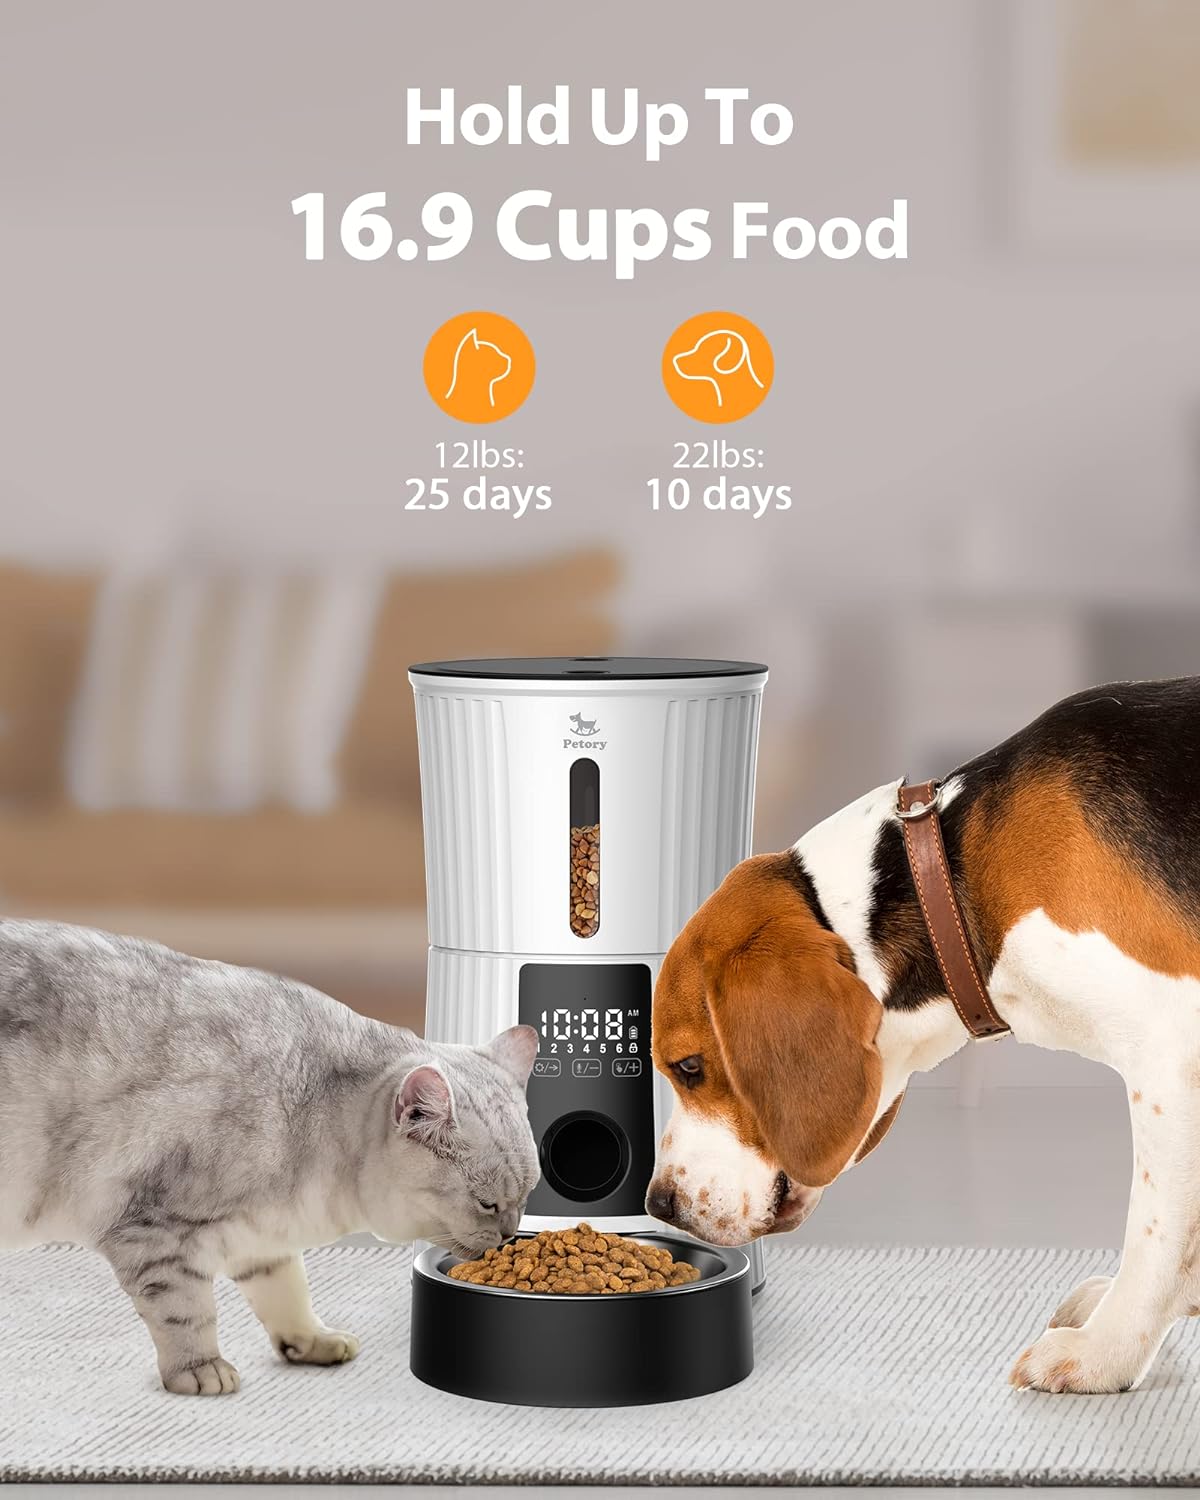 Petory Timed Automatic Cat Feeders - $45